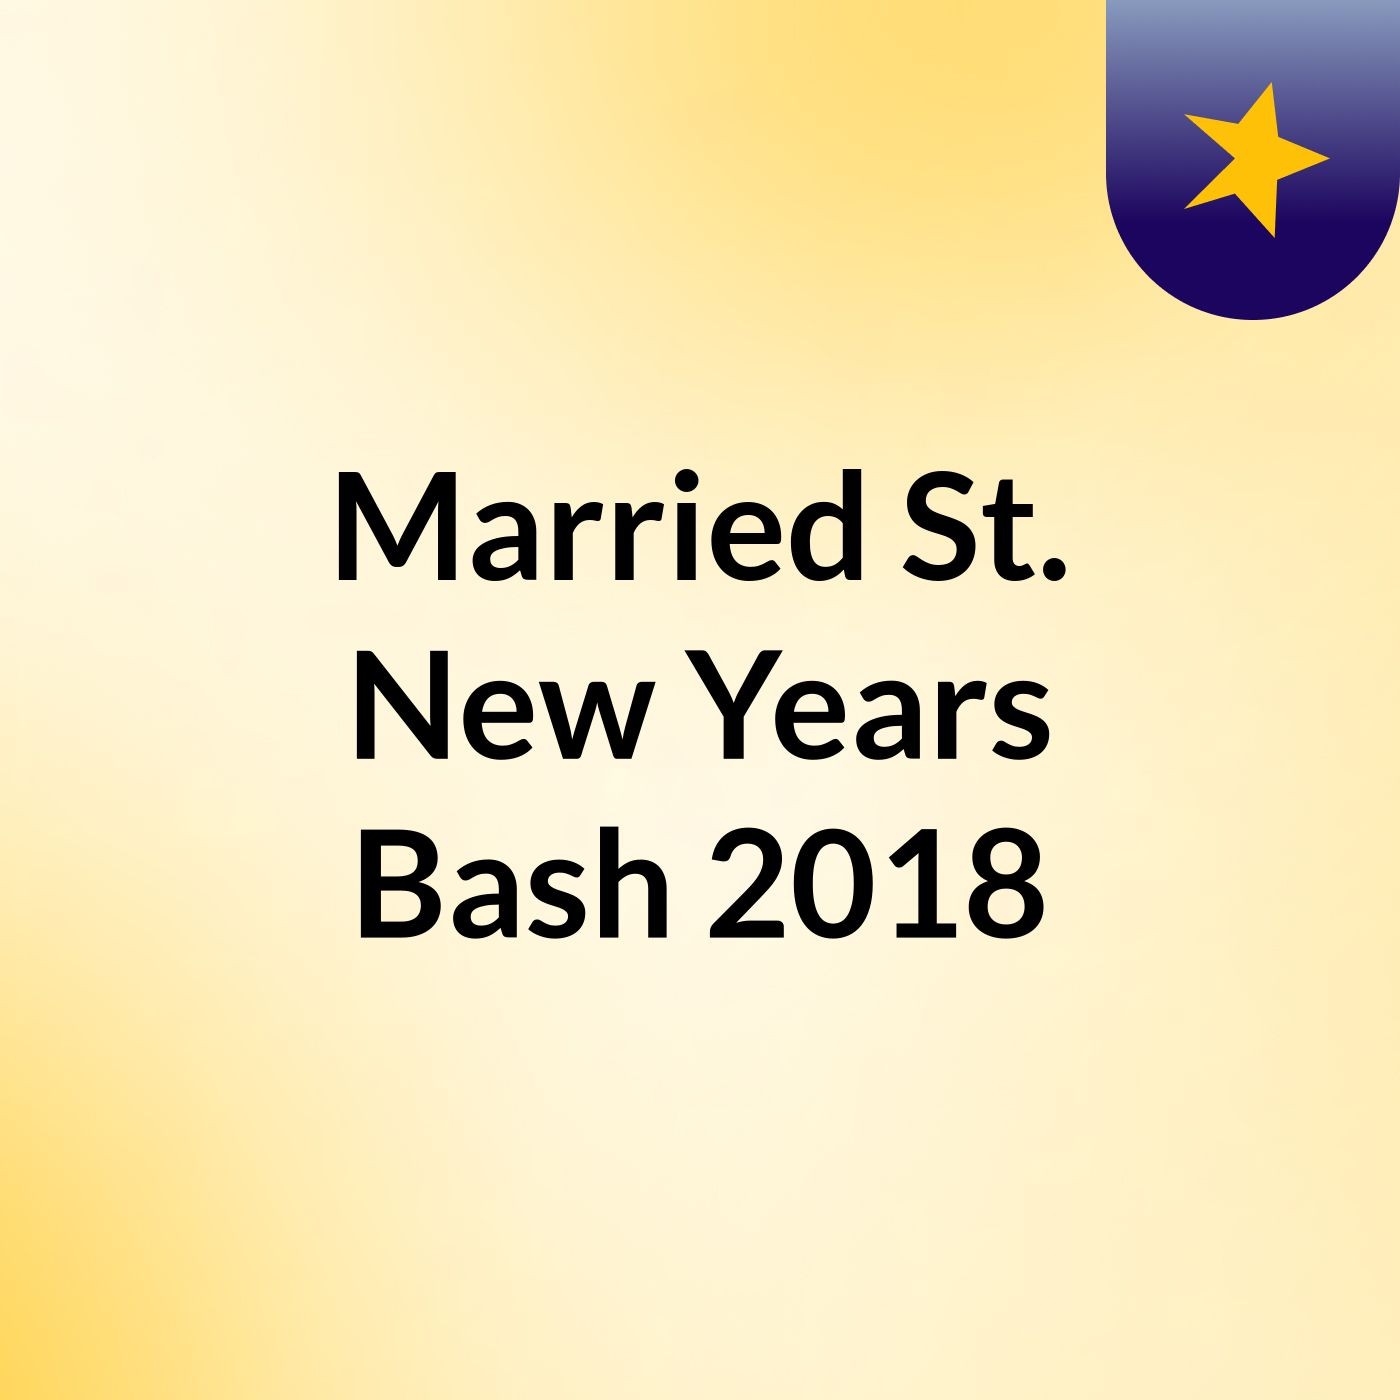 Married St. New Years Bash 2018